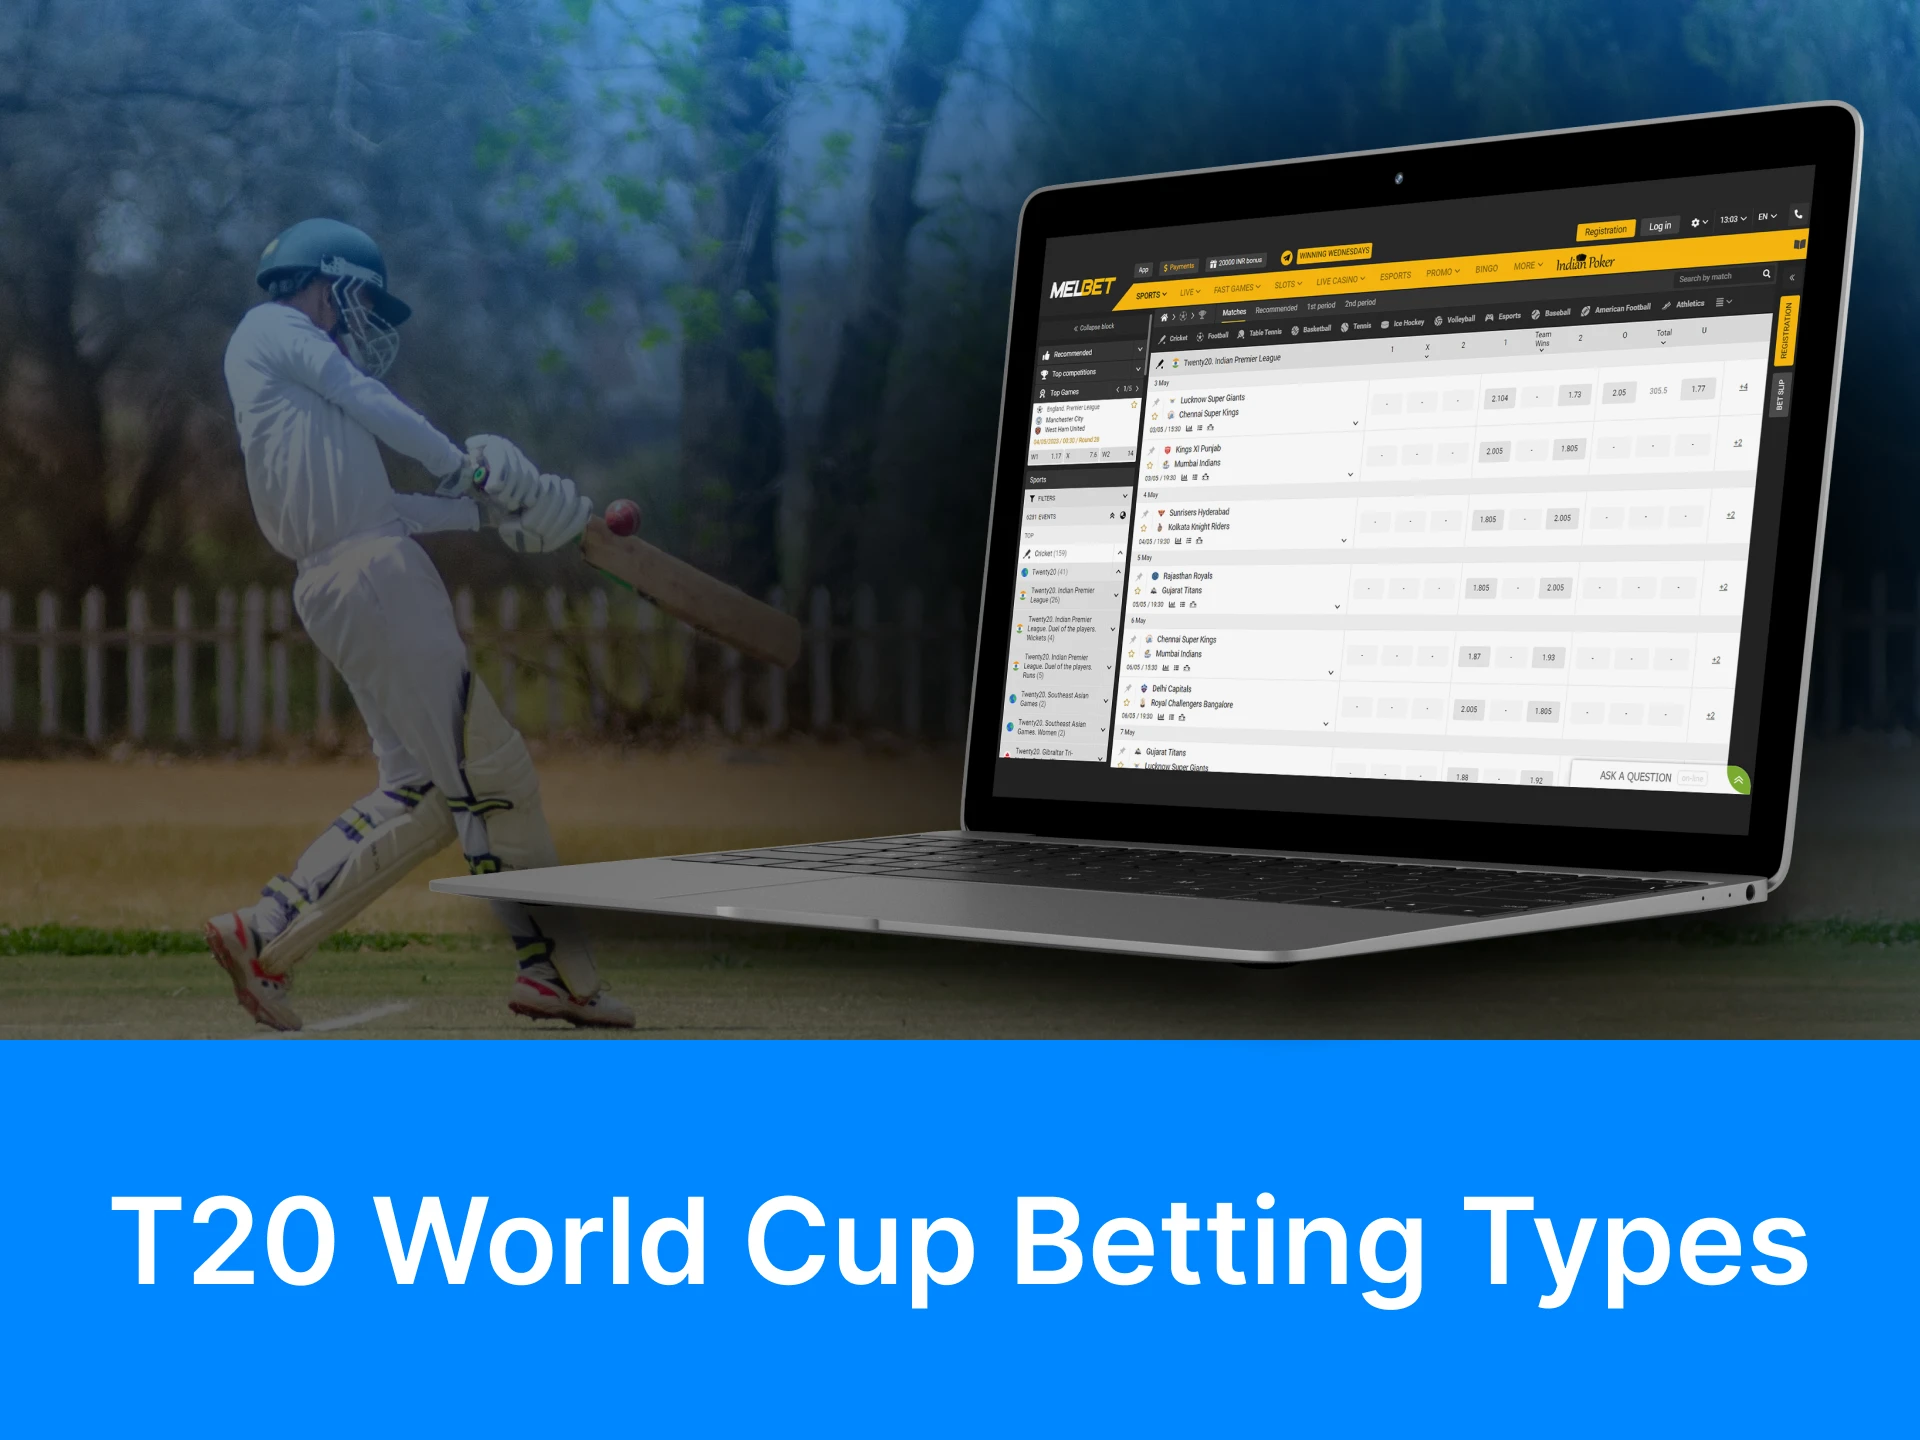 Betting on matches of the T20 World Cup includes different sets of bets.